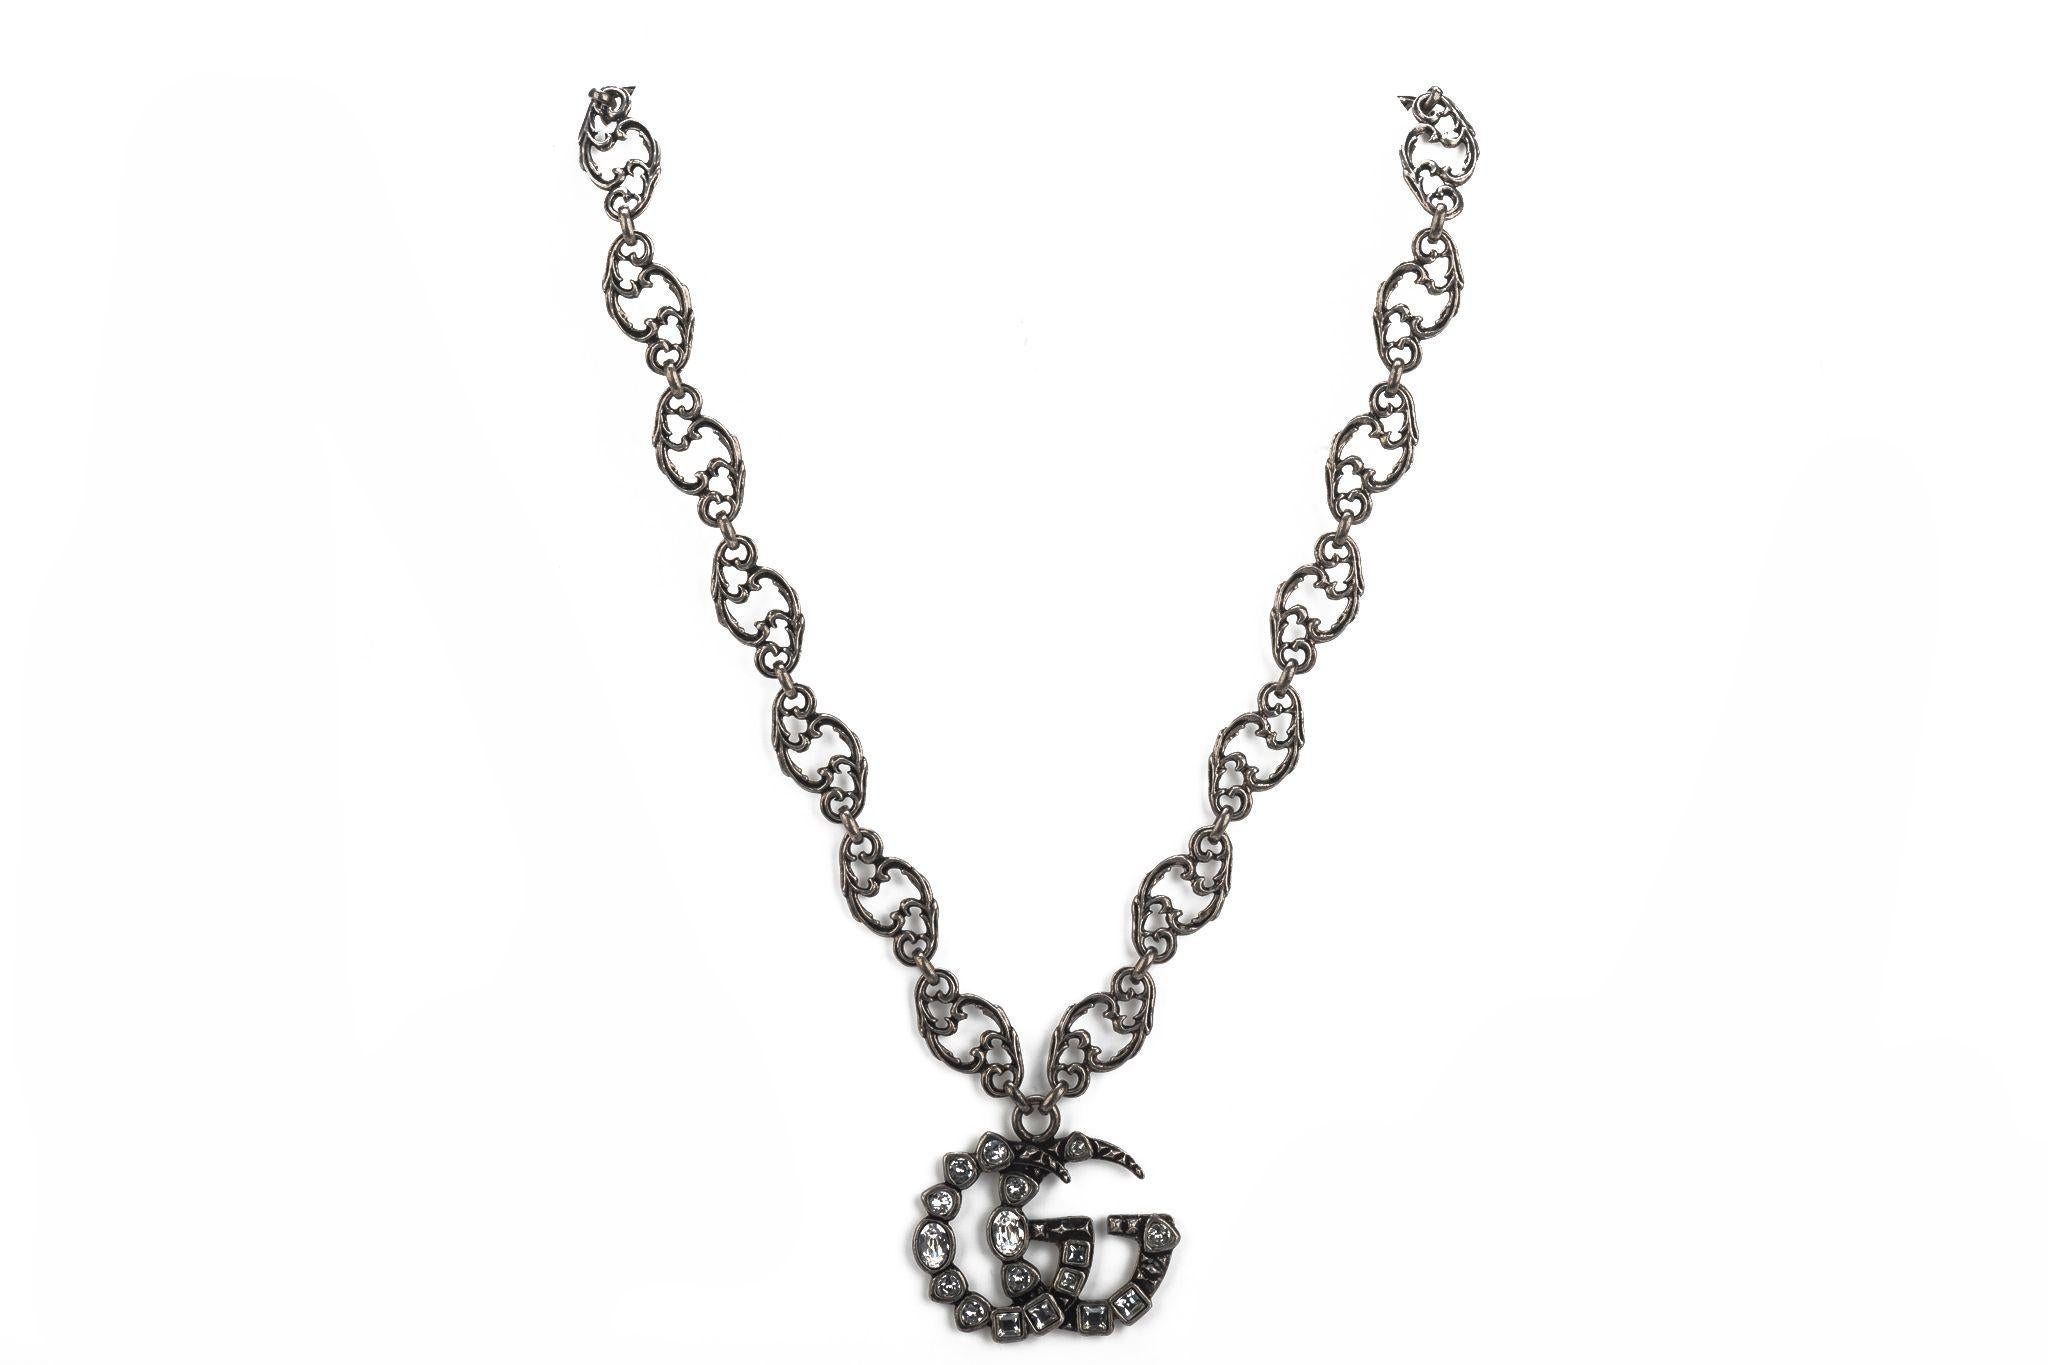 Gucci new gunmetal necklace with crystal GG logo pendant. Original price $890. Comes with original box.